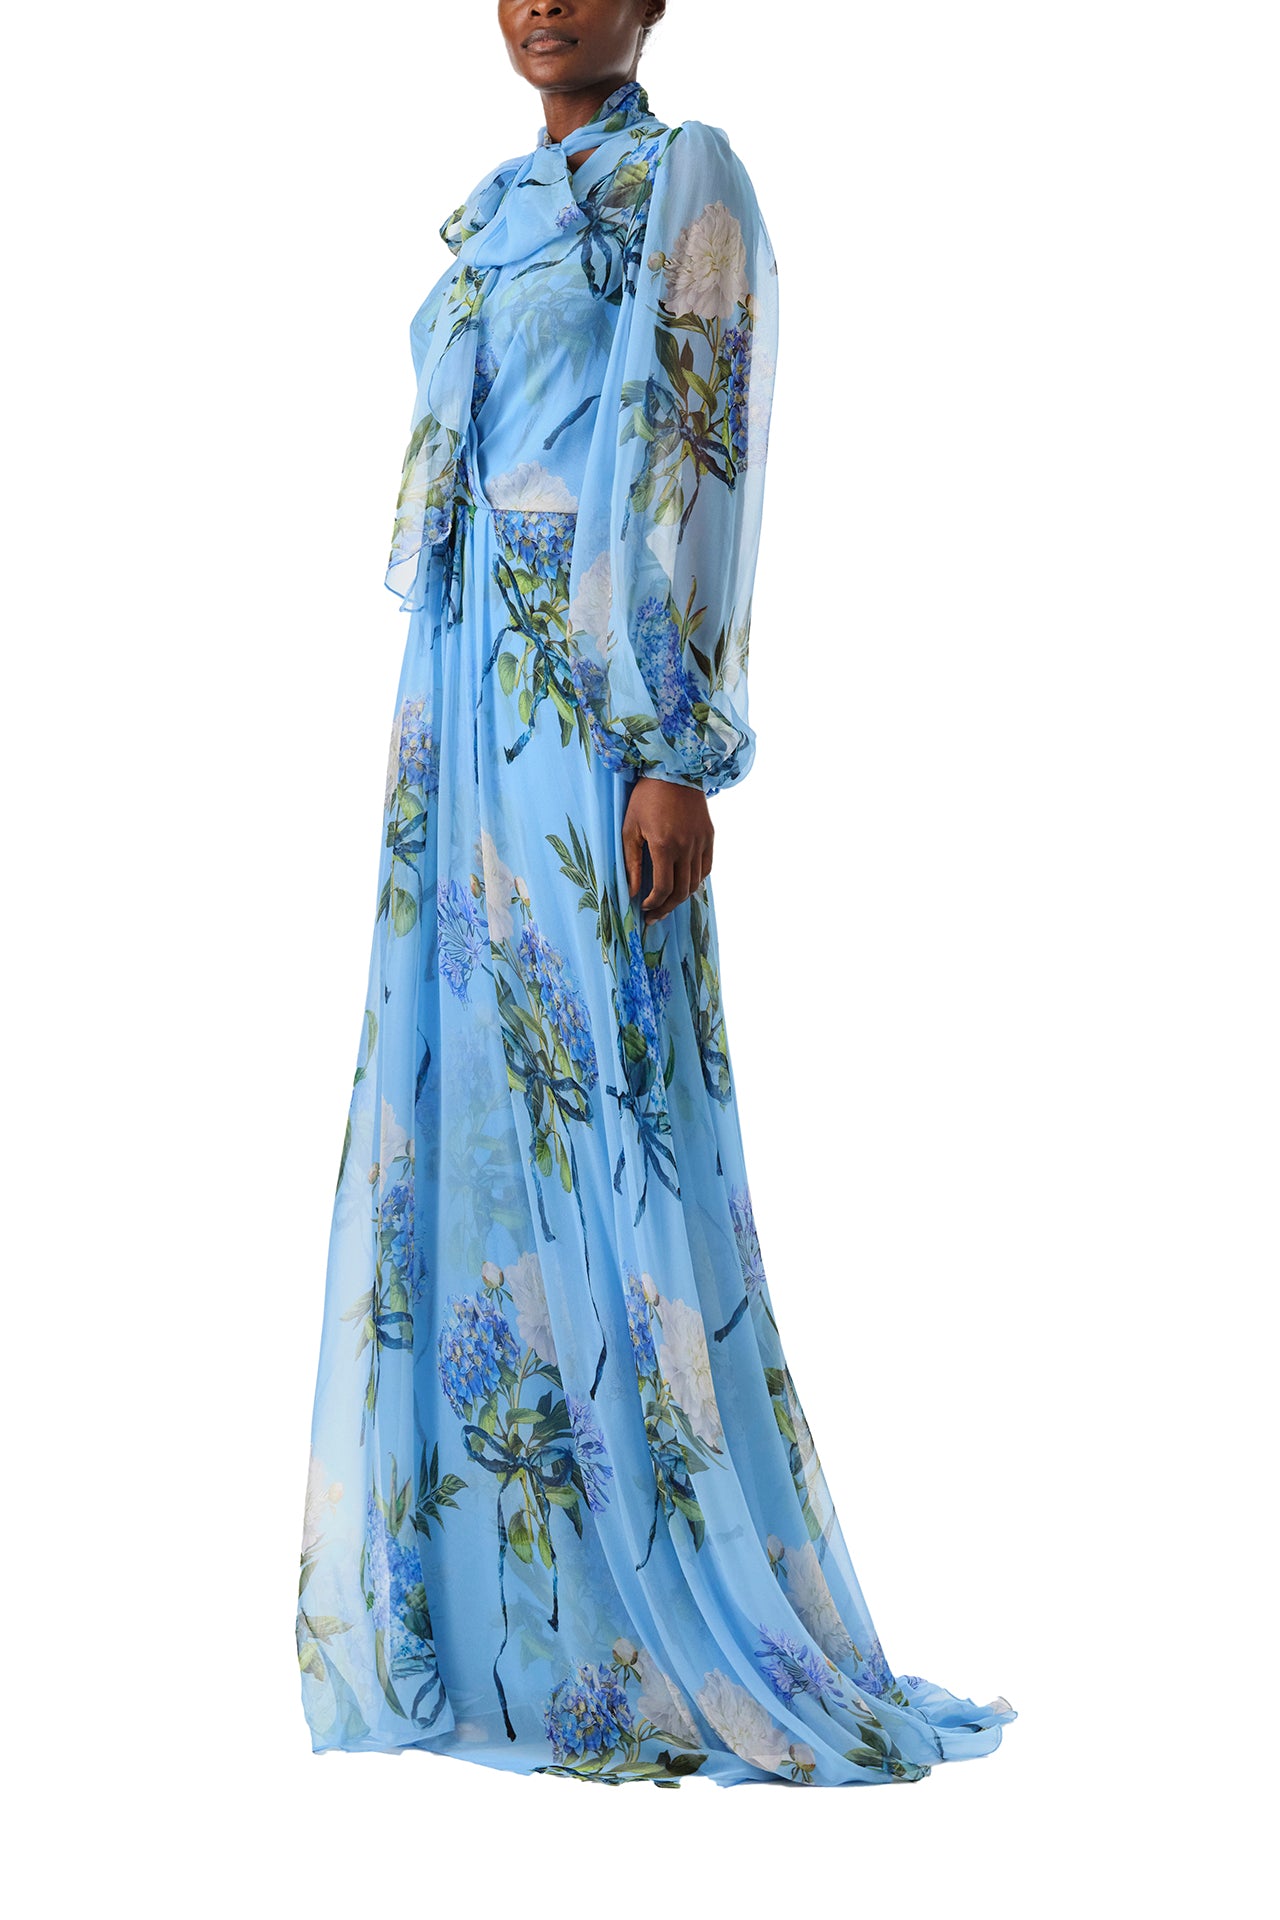 Monique Lhuillier Fall 2024 long sleeve gown in blue floral printed chiffon with self-tie neckline - left side.